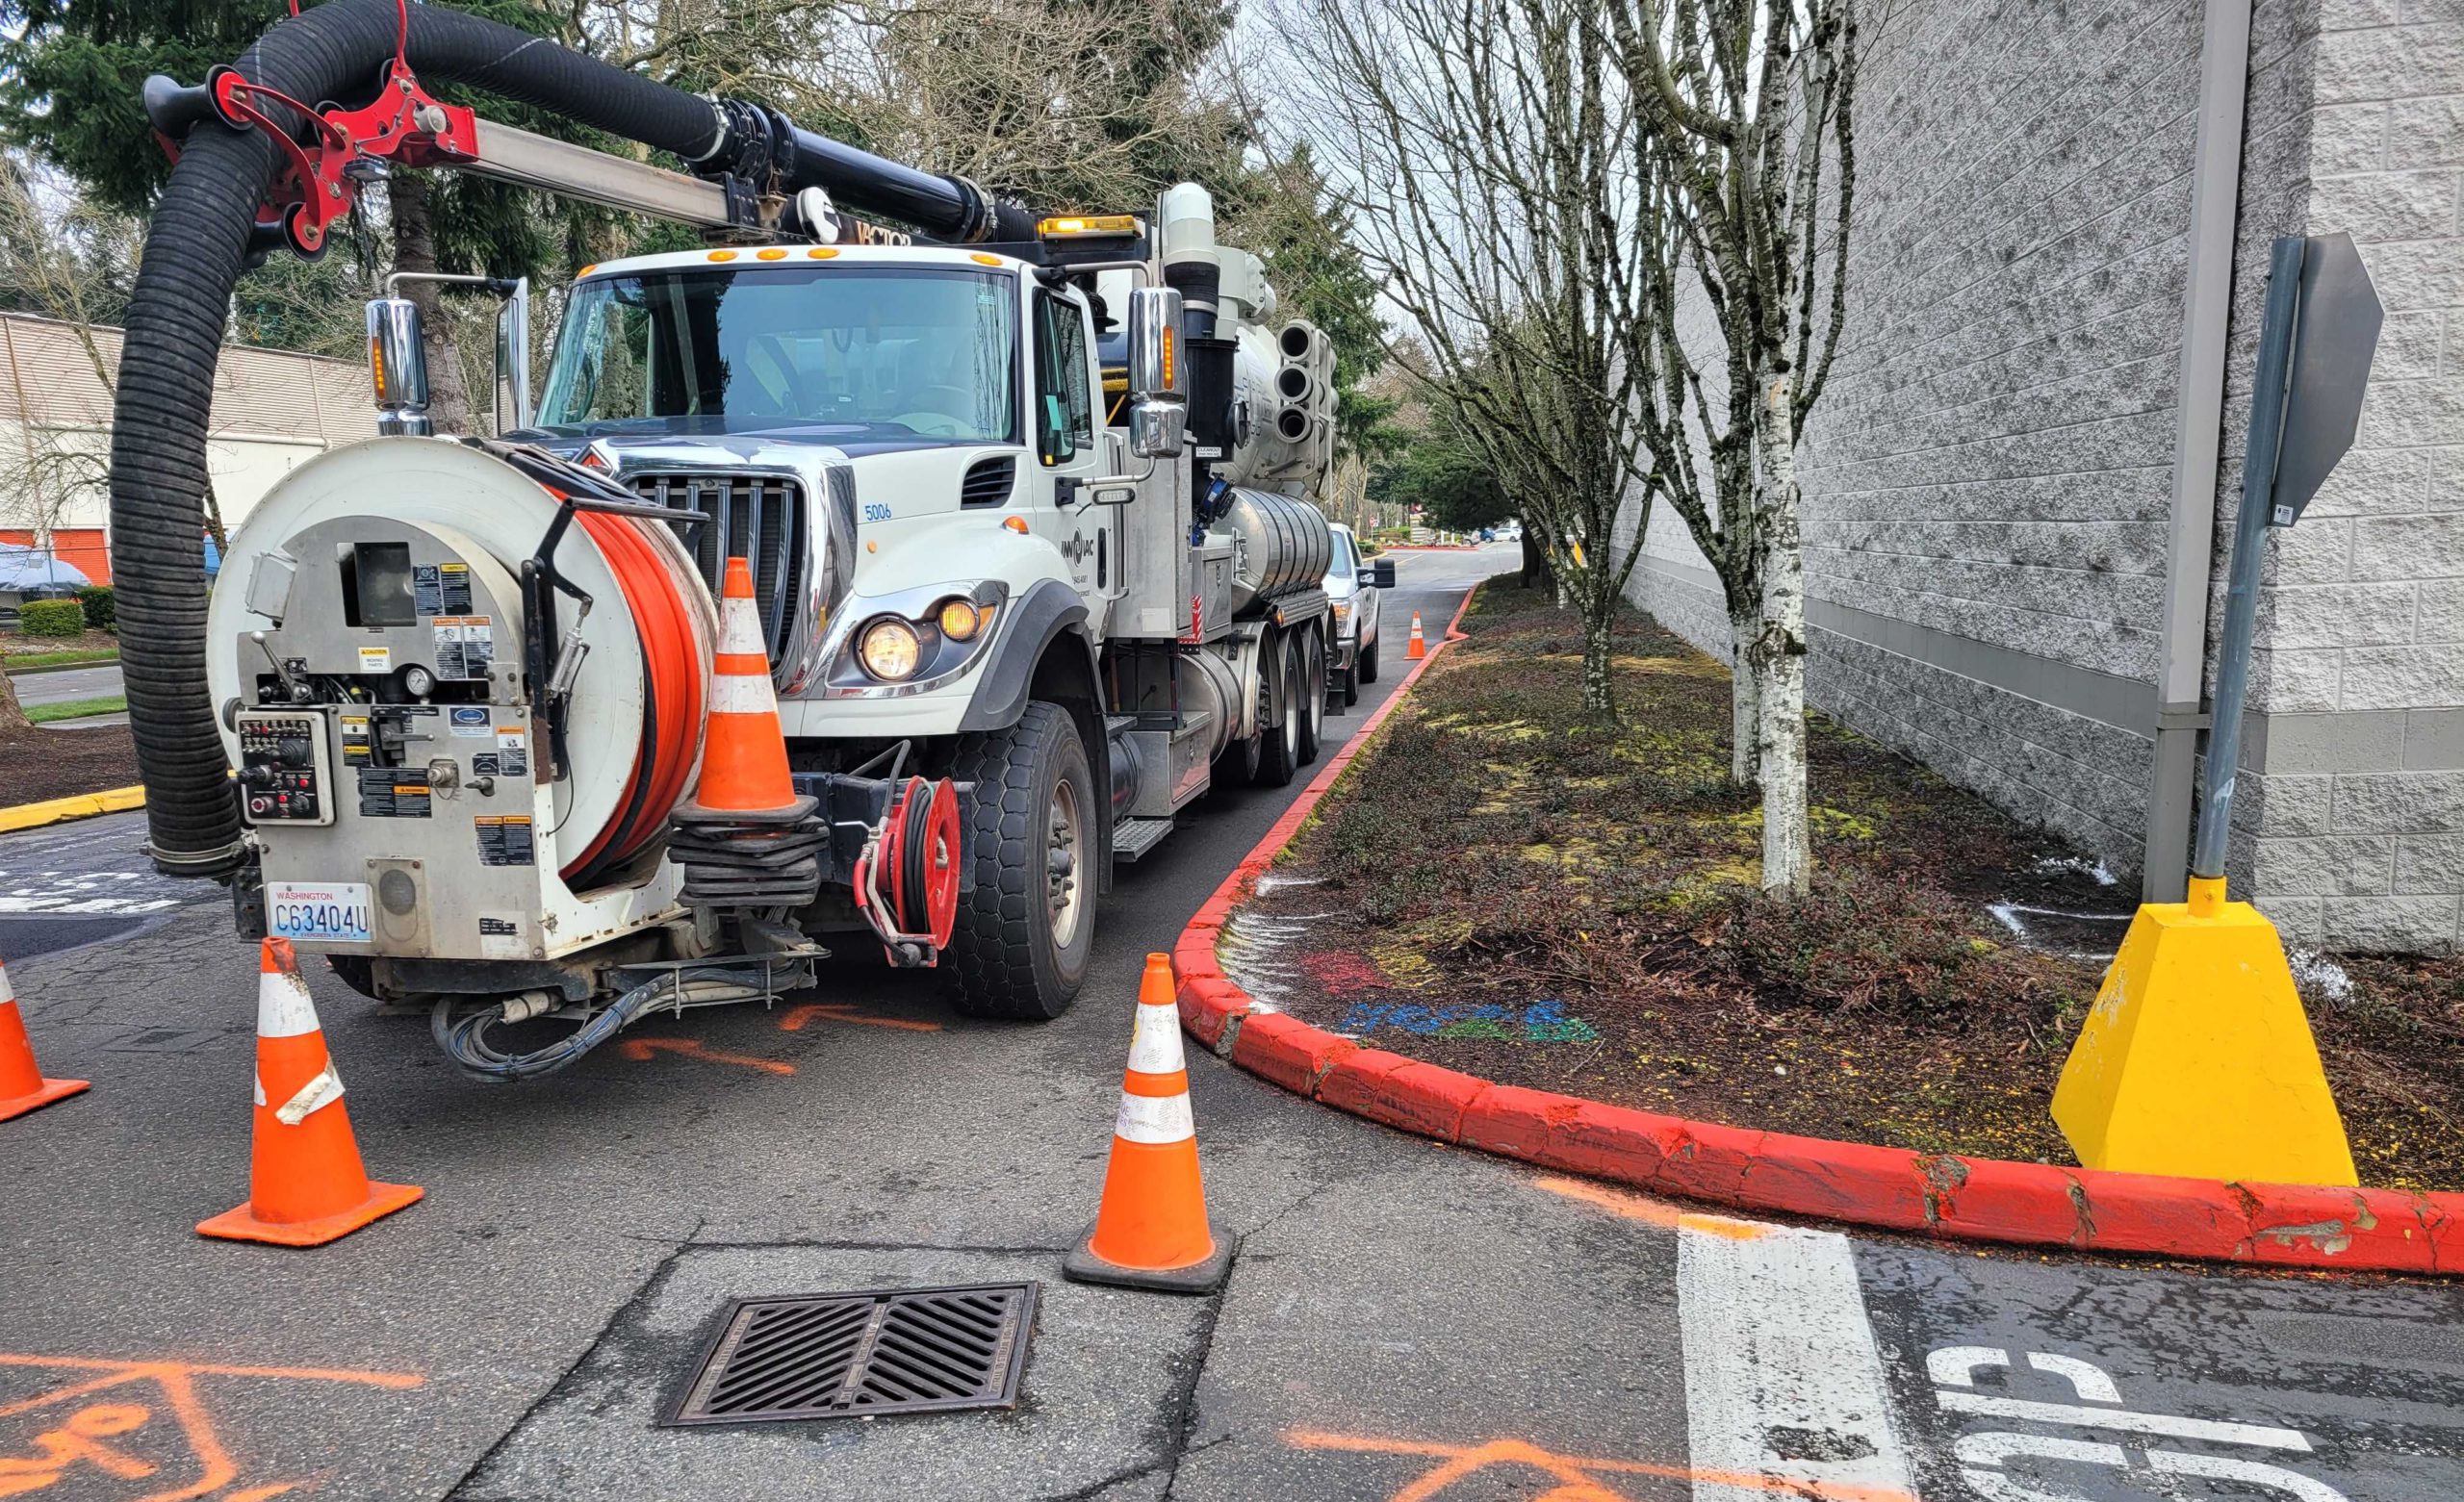 Truck with hydro vacuum, orange traffic cones and front-mounted hose spool parked at curb in front of storm drain grate